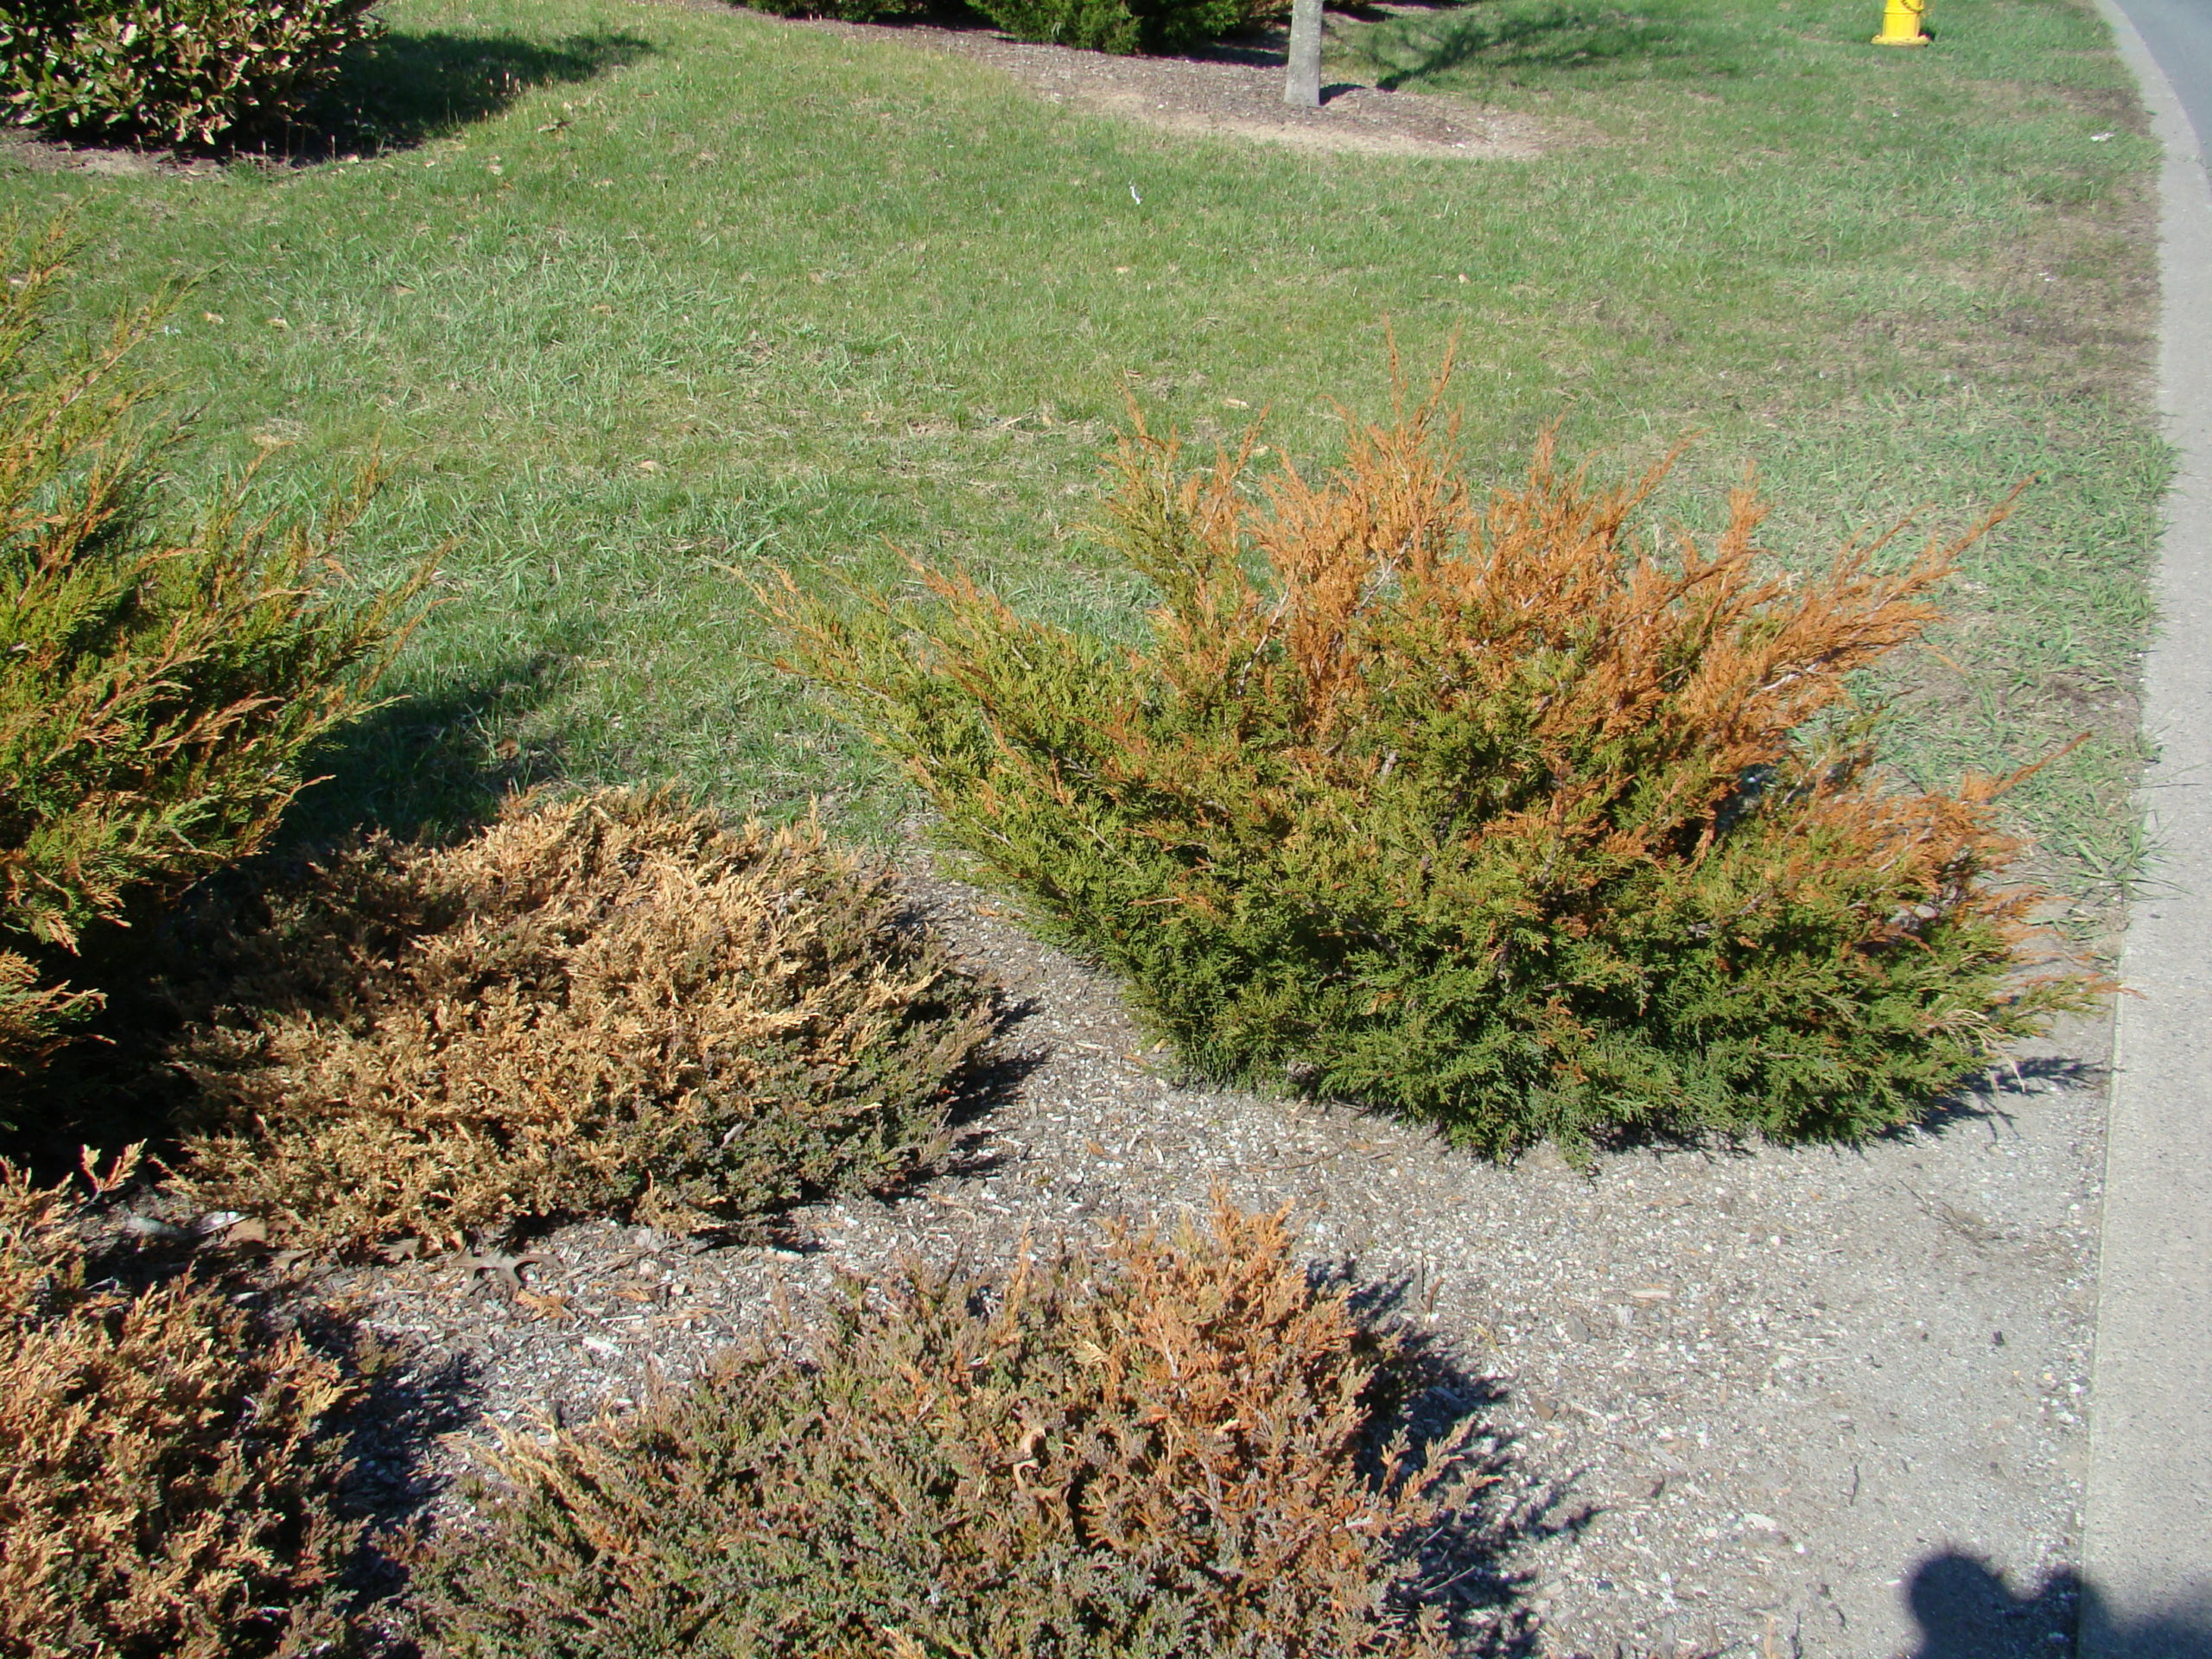 These junipers were burned in the winter from road salt applied just feet away. It appears that the damage is from roots being burned from salt splashing into the bed from the road as well as burning from salt that may have been in the snow plowed onto the planting bed.